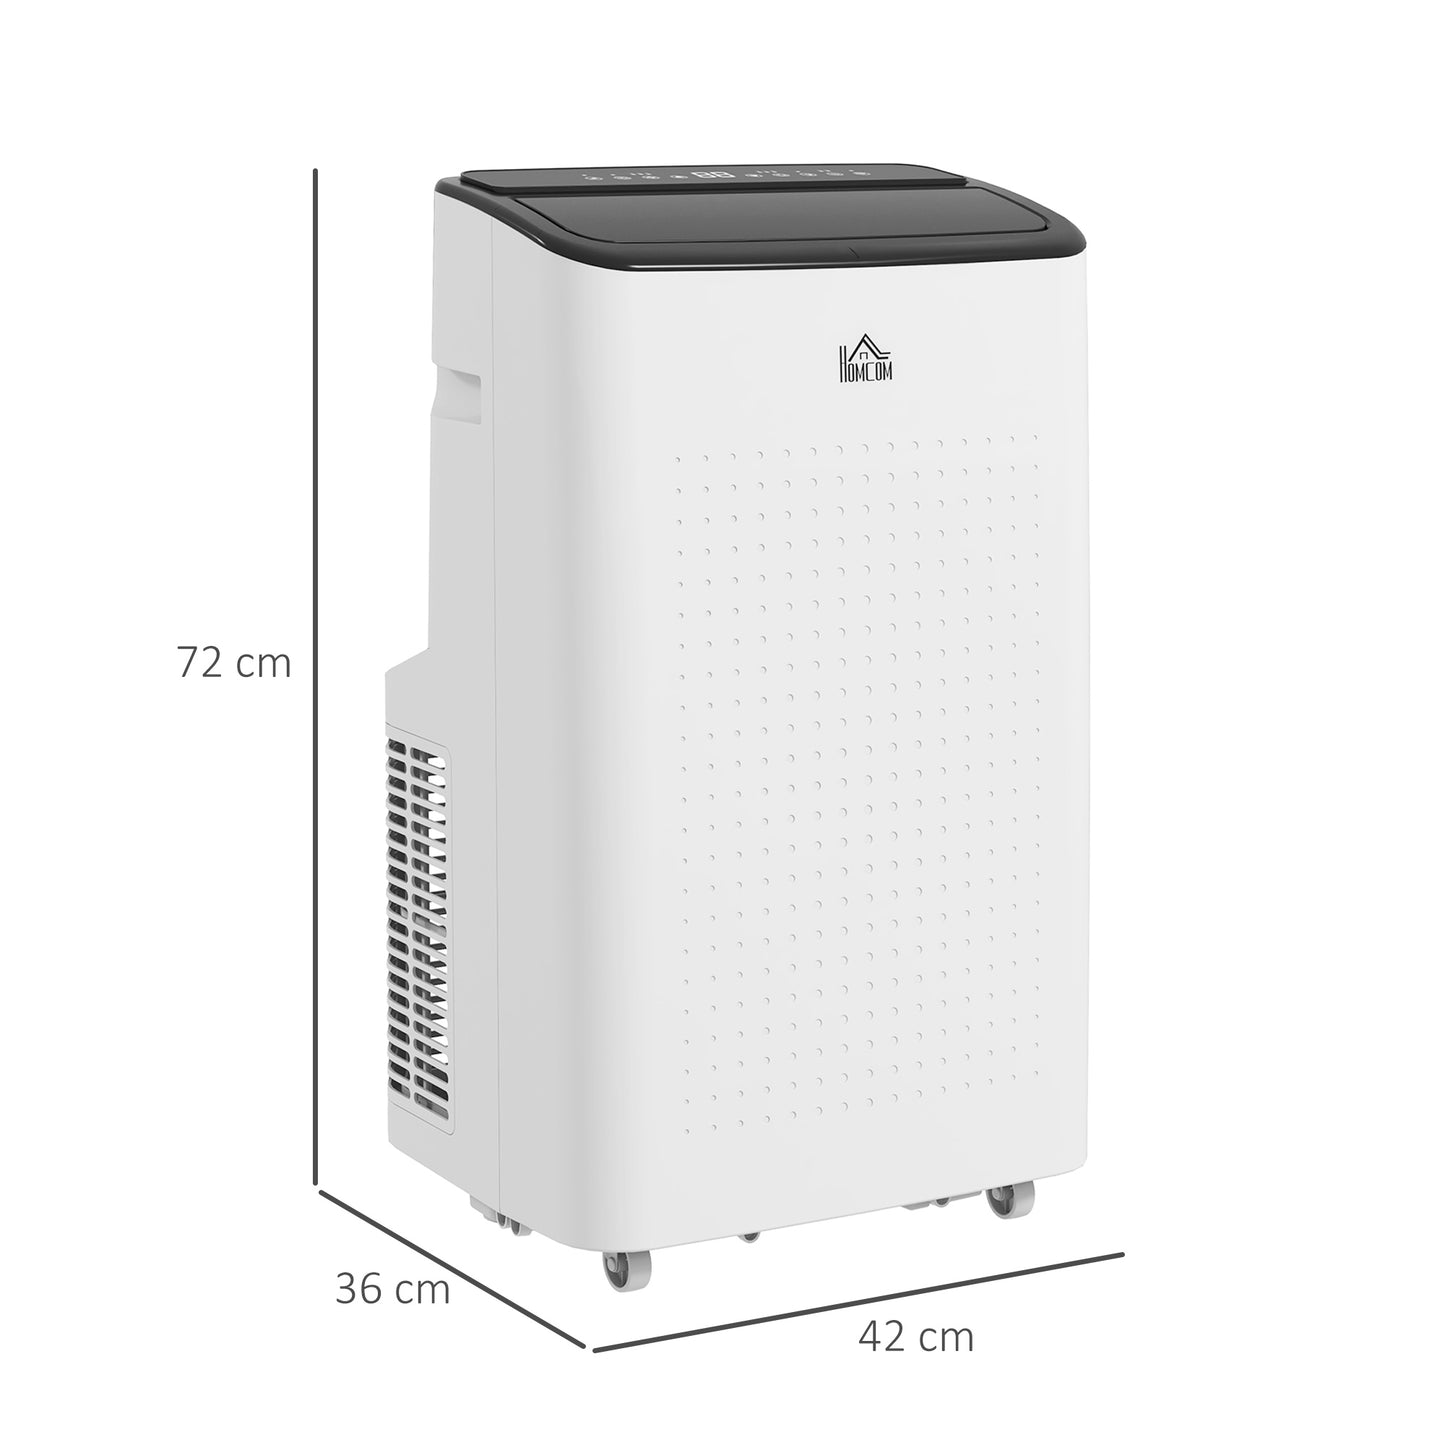 HOMCOM 12,000 BTU Mobile Air Conditioner for Room up to 26m², Smart Home WiFi Compatible, with Dehumidifier, Fan, 24H Timer